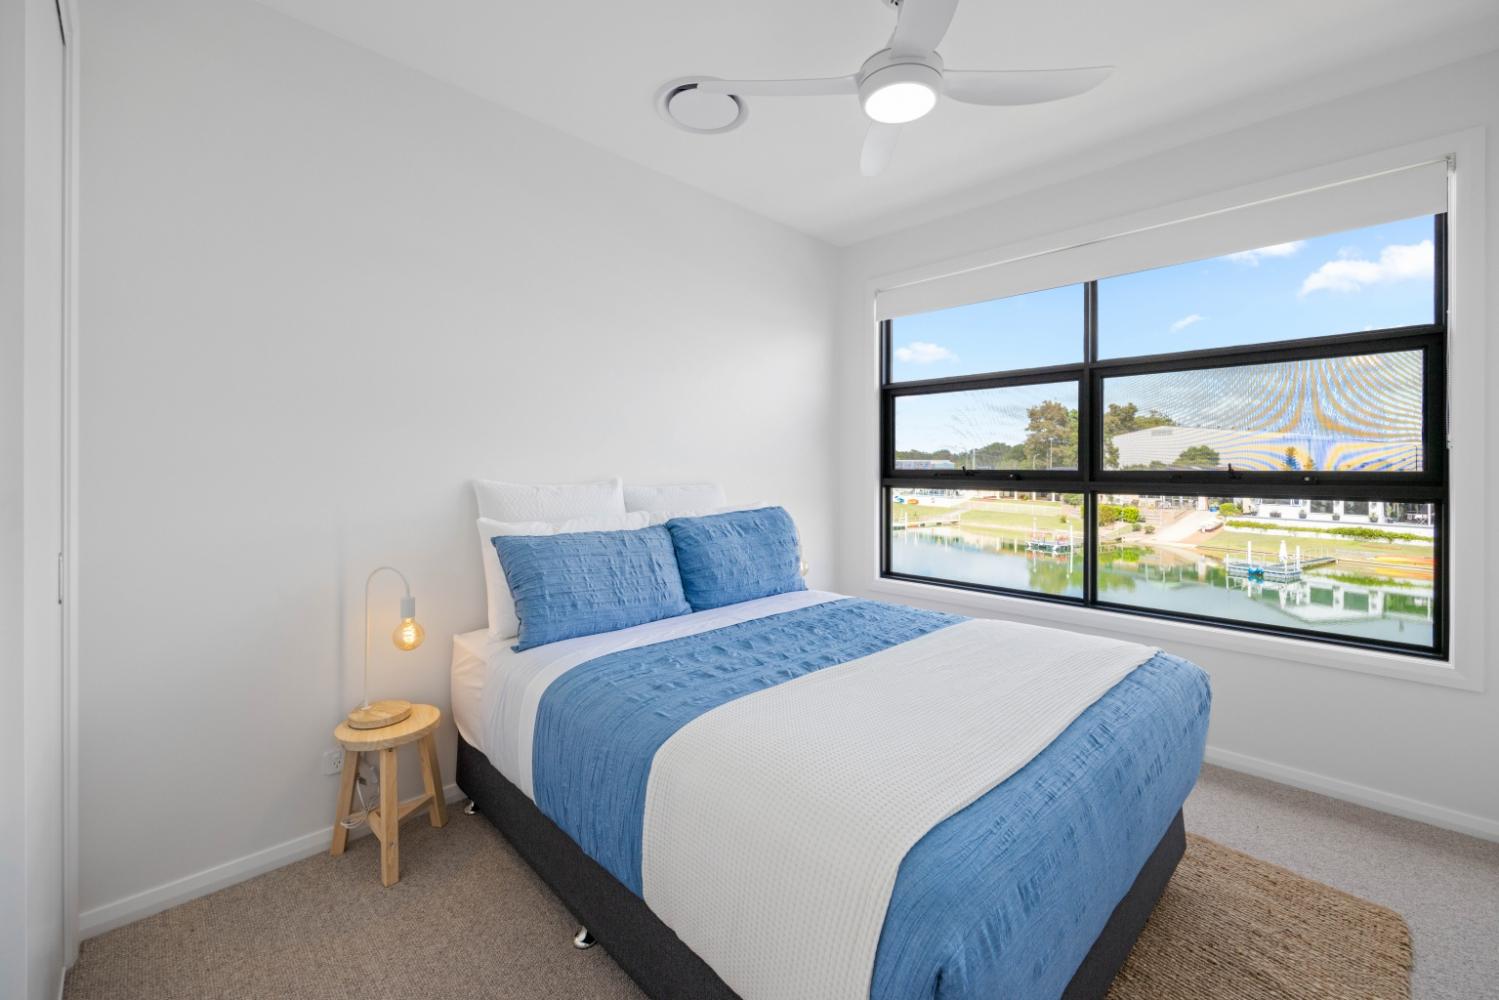 Second bedroom with queen bed and Canal views. Hamiltons